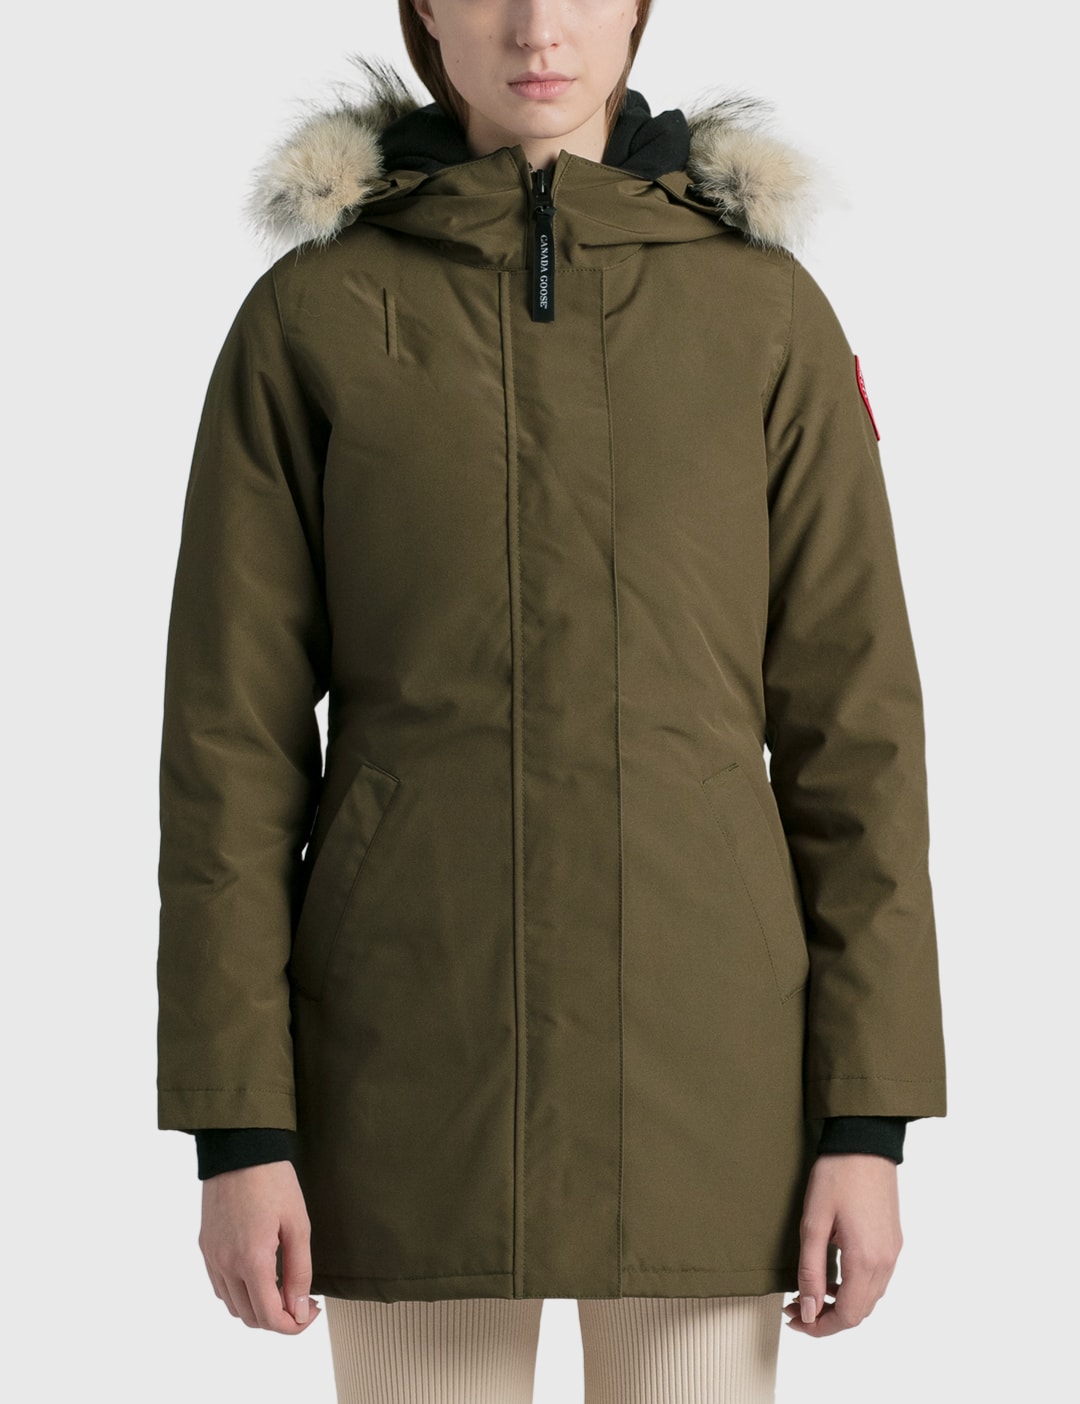 Fredag med undtagelse af Symptomer Canada Goose - VICTORIA PARKA | HBX - Globally Curated Fashion and  Lifestyle by Hypebeast